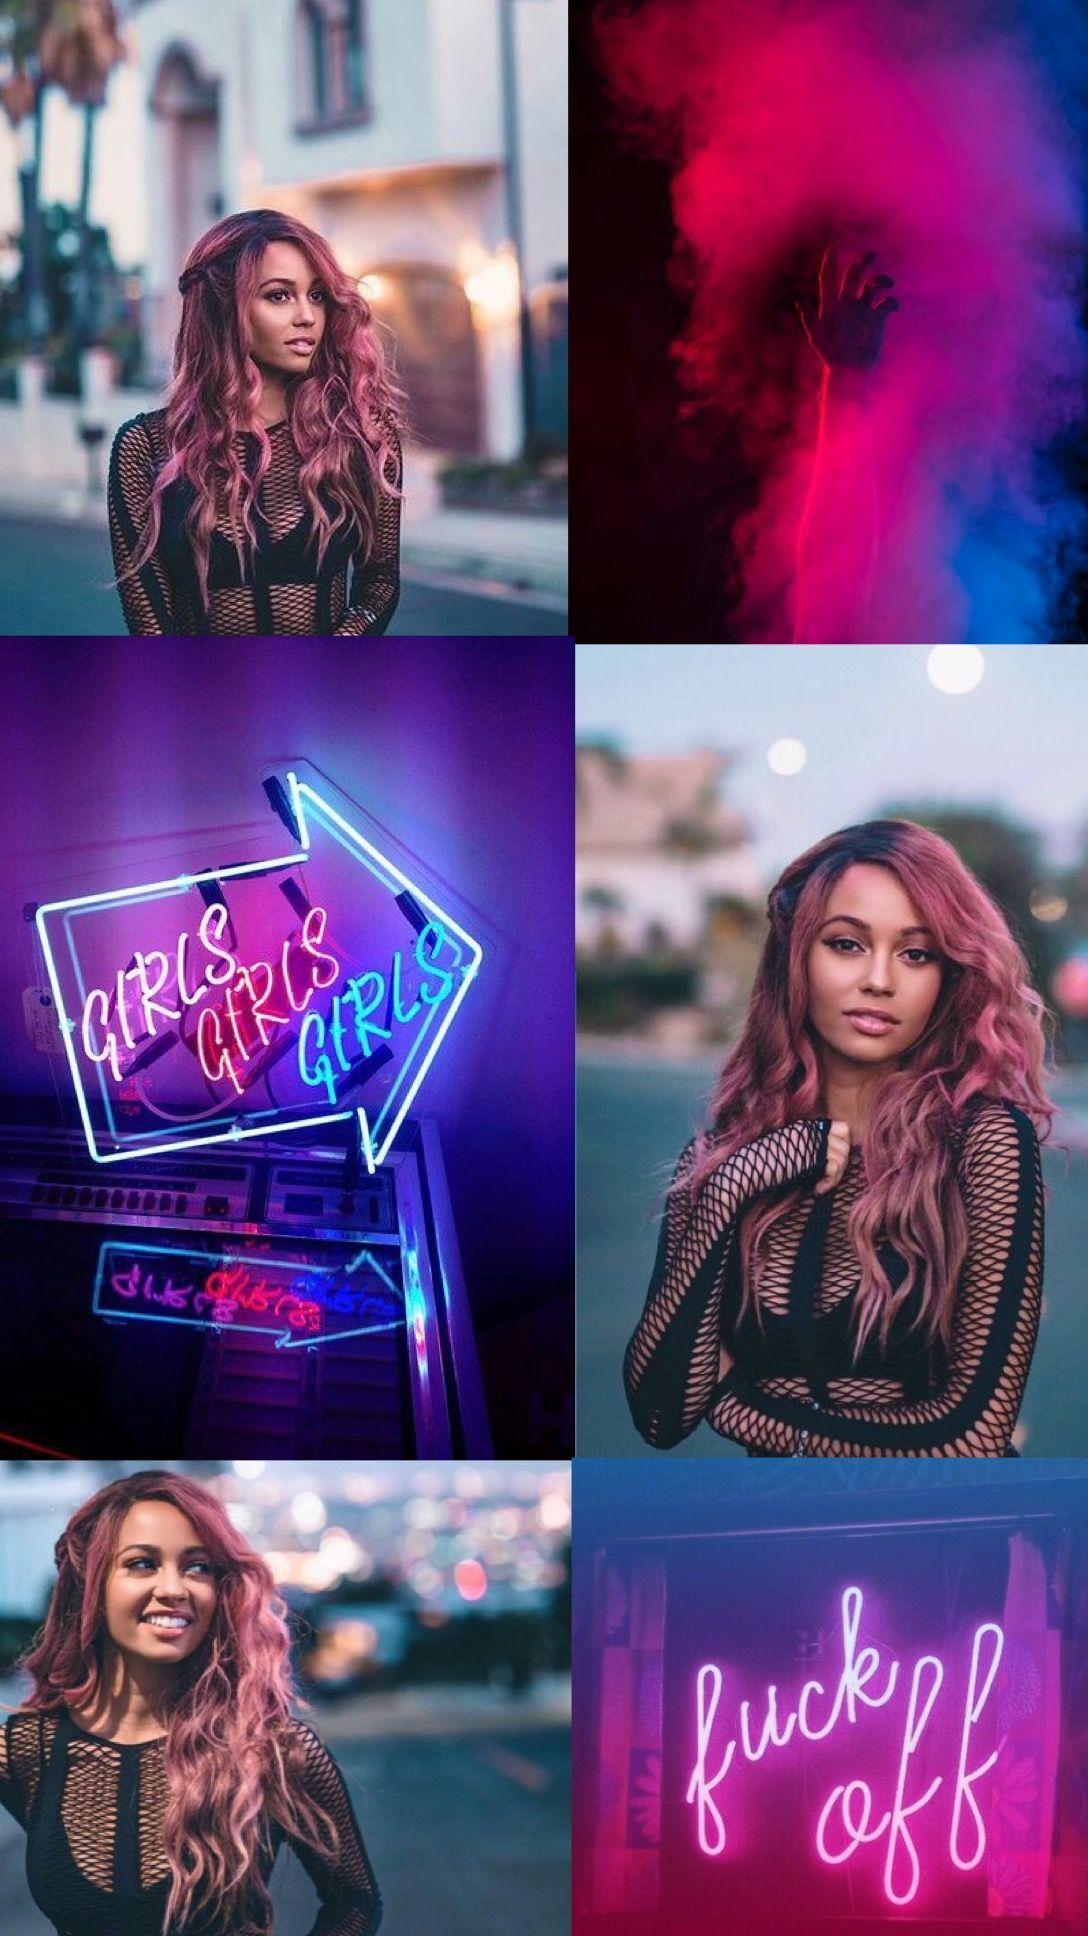 tony topaz aesthetic comment if you use it